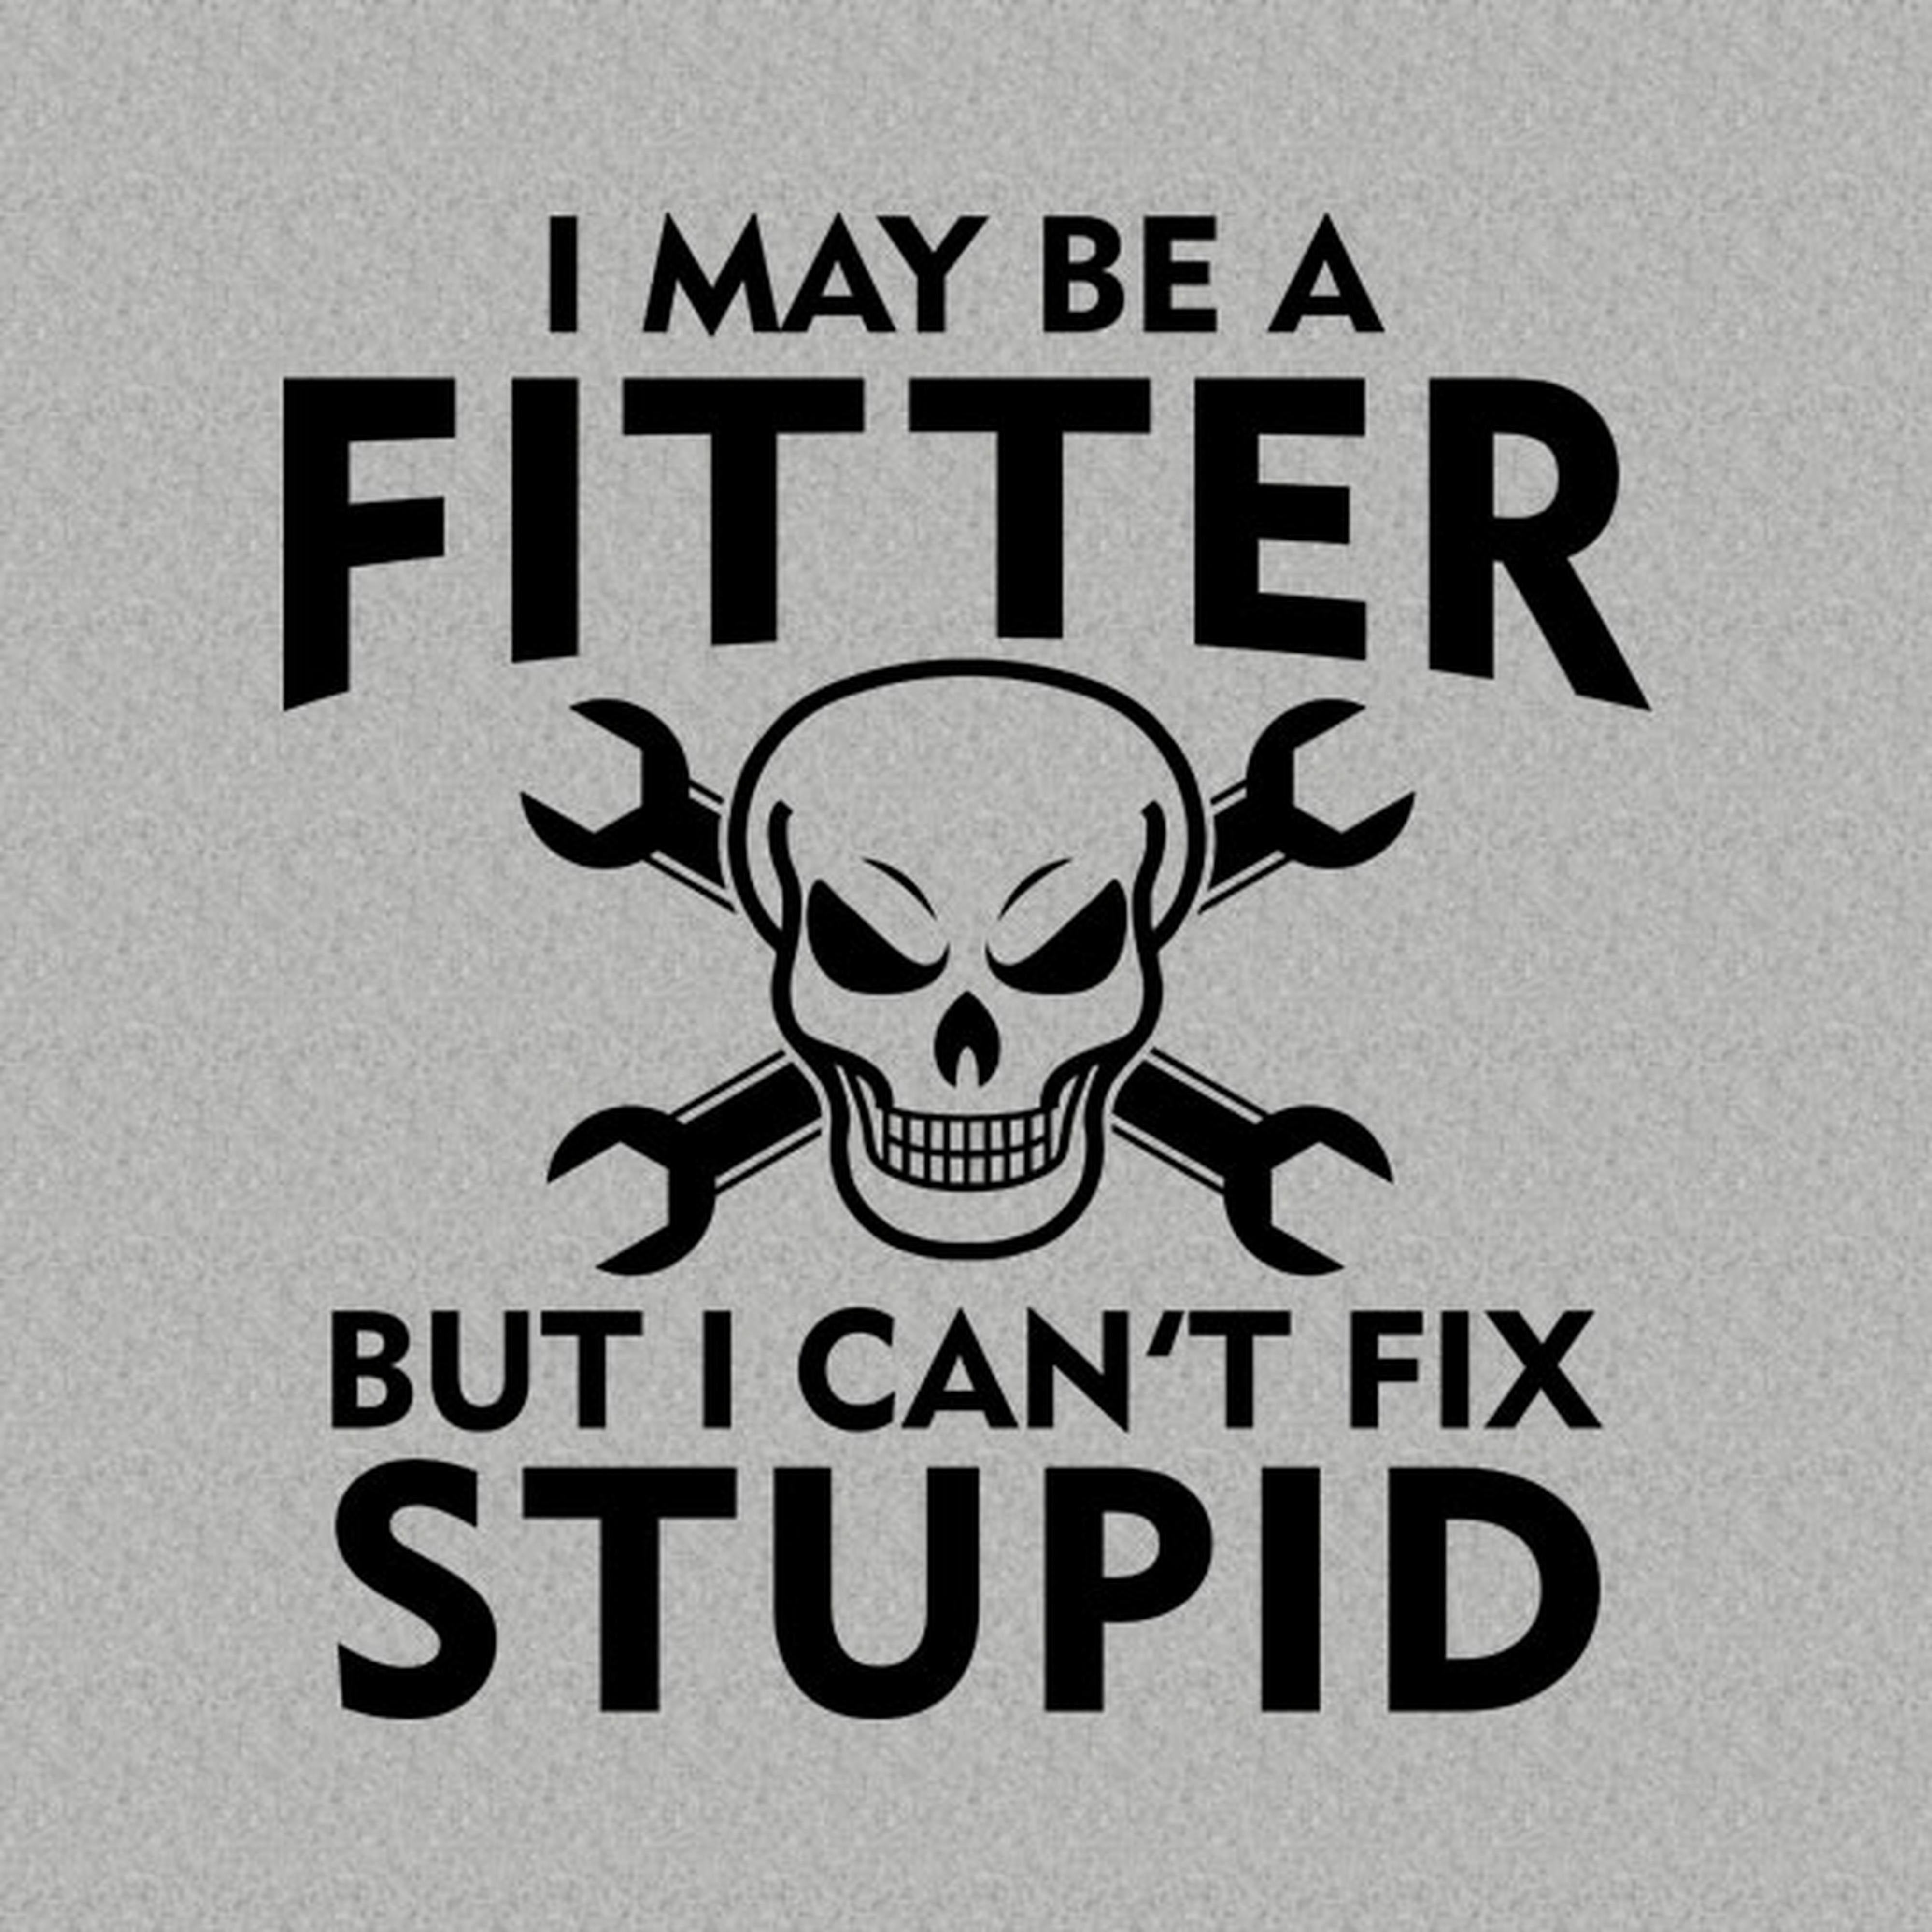 I may be a fitter but I can't fix stupid - T-shirt